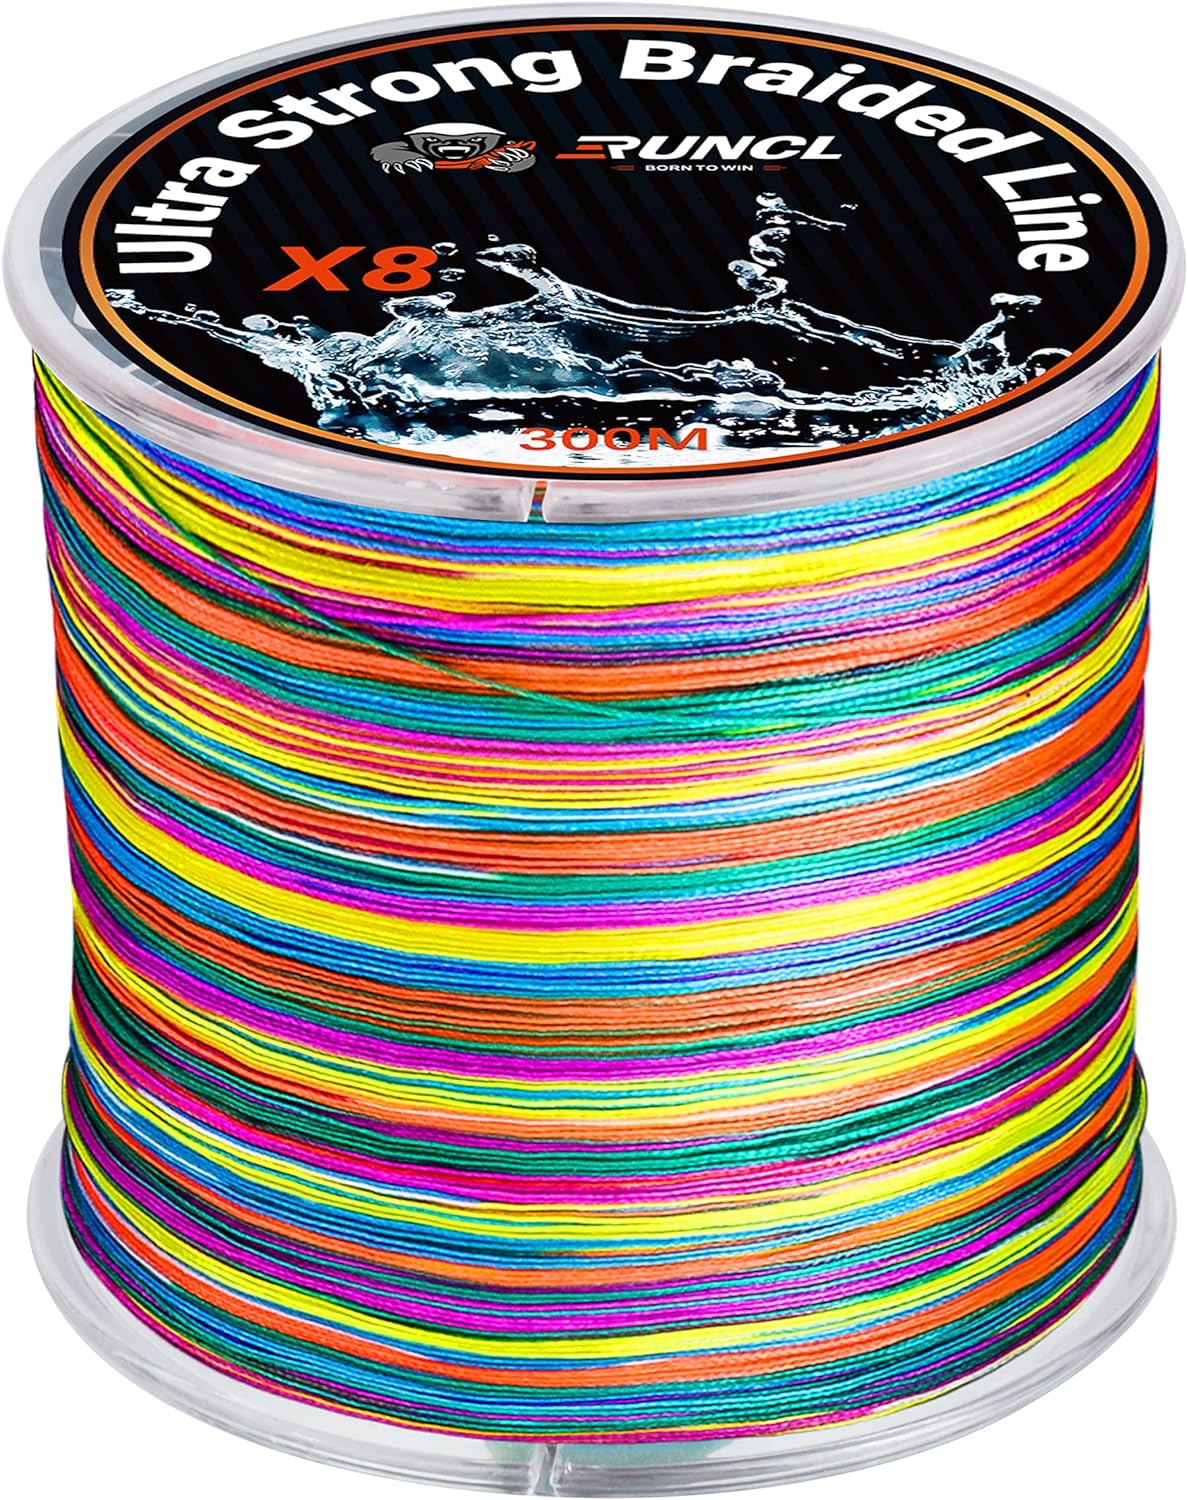 RUNCL Braided Fishing Line, Abrasion Resistant, Zero Stretch, 8X Multicolor Extra Visibility Fishing Braid for Saltwater Freshwater, 328-1093 yds, 12-100LB, Fishing Gift, Holiday Decor - RUNCL Braided Fishing Line Review